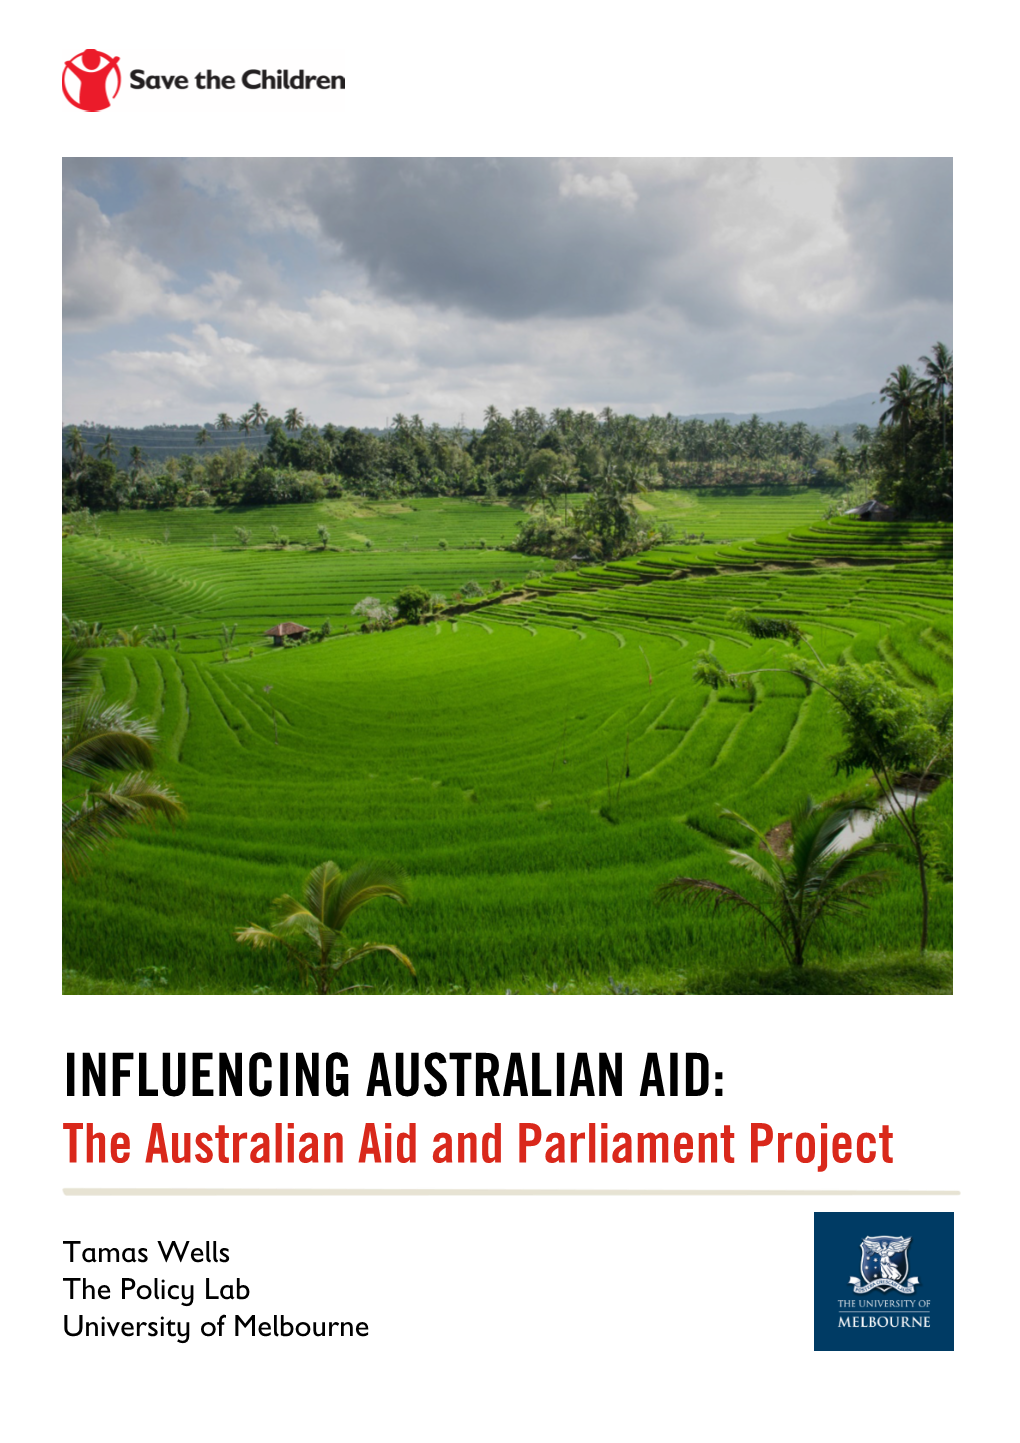 INFLUENCING AUSTRALIAN AID: the Australian Aid and Parliament Project